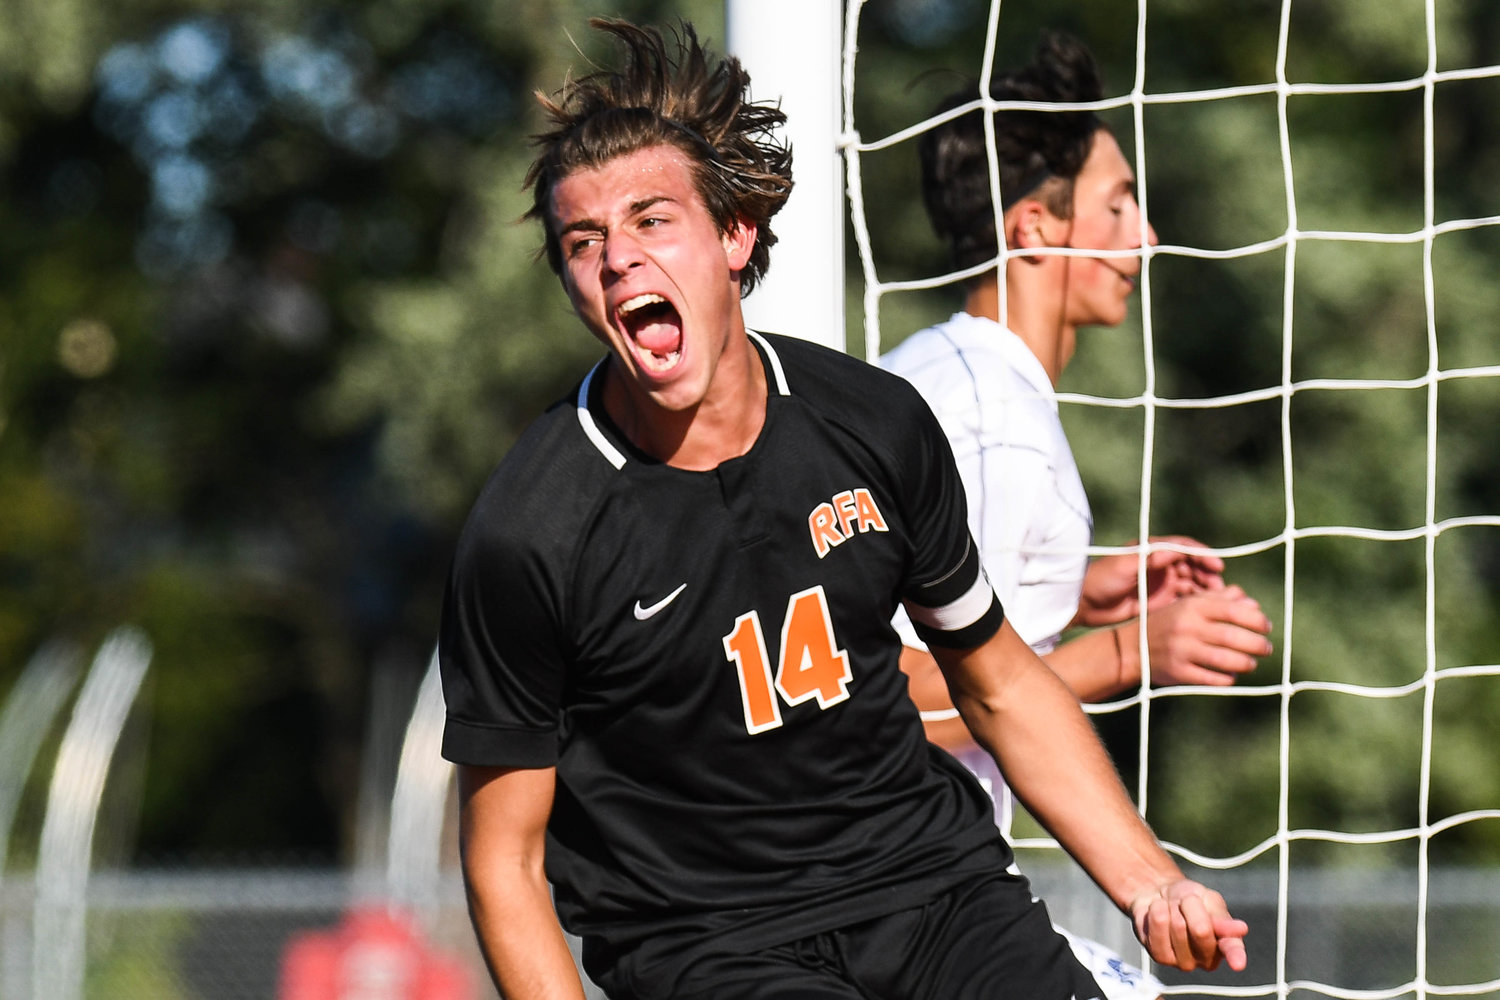 Rome Free Academy forward Collin Gannon celebrates after scoring a goal during the soccer game against Whitesboro on Thursday. Gannon scored twice in a 4-1 win.